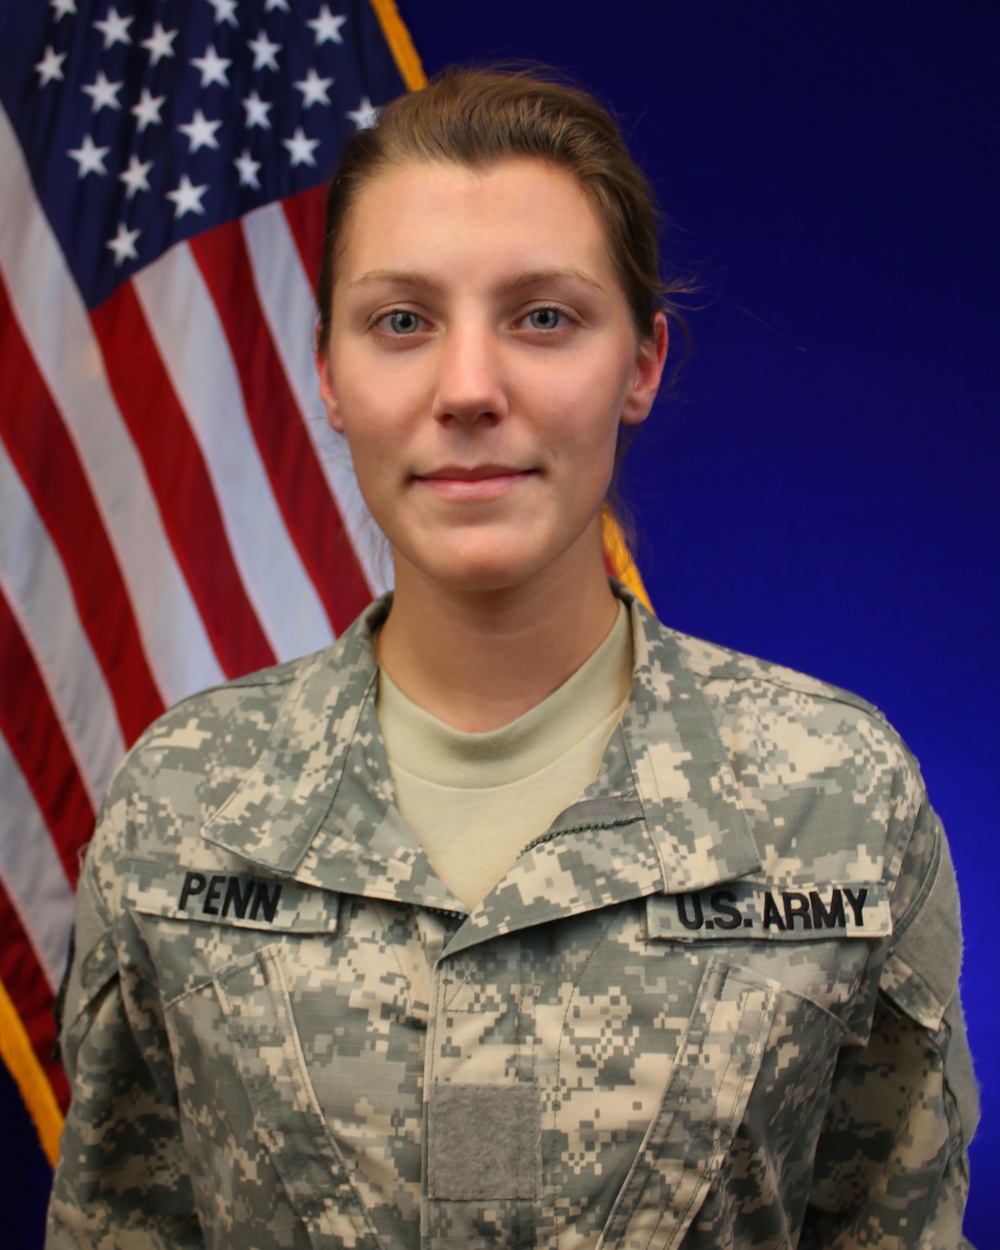 Recruit sets example for females at National Guard program